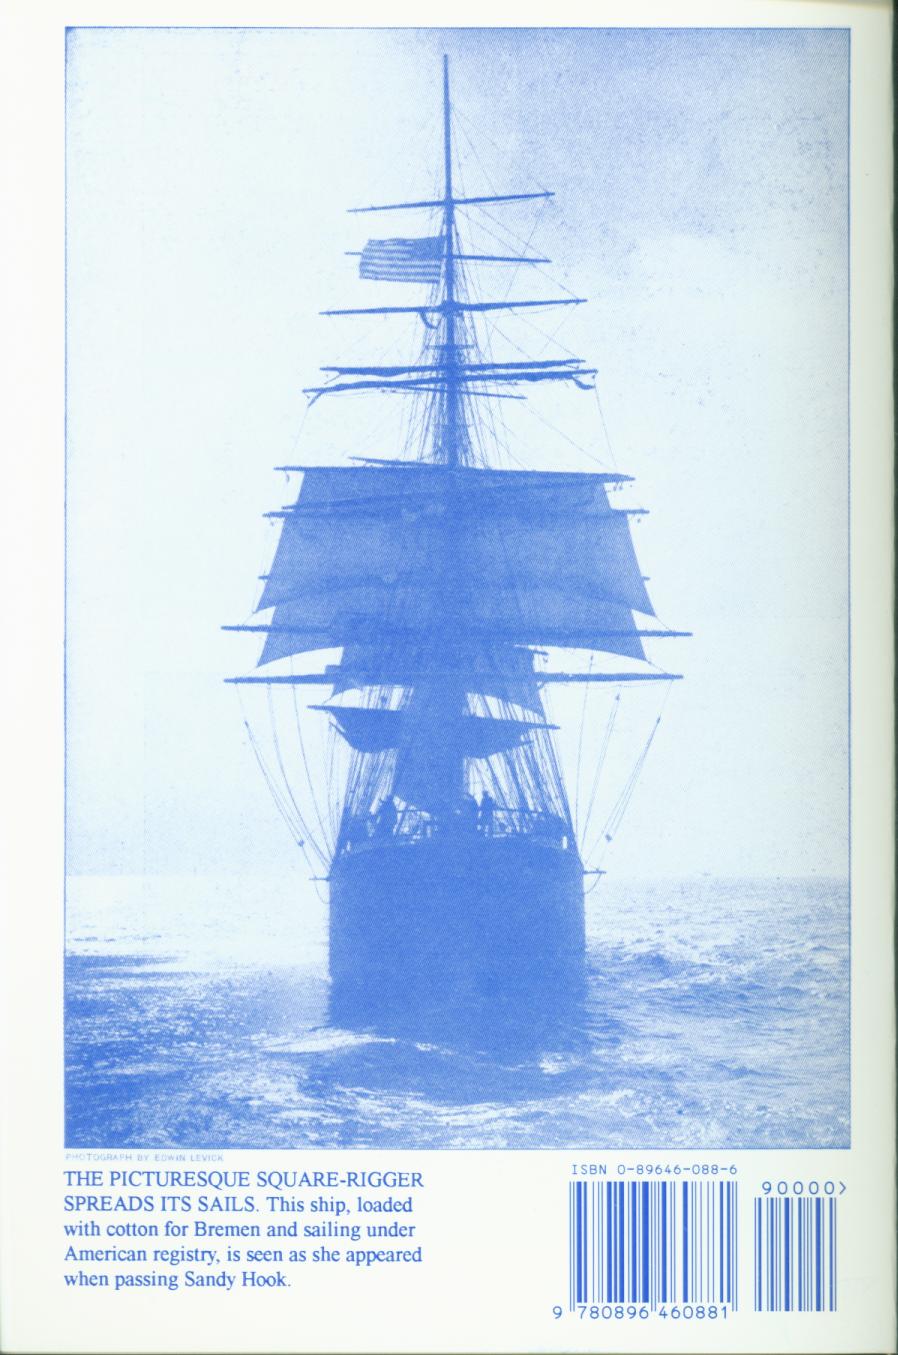 "Heroes of the Surf" picture of Square-rigger